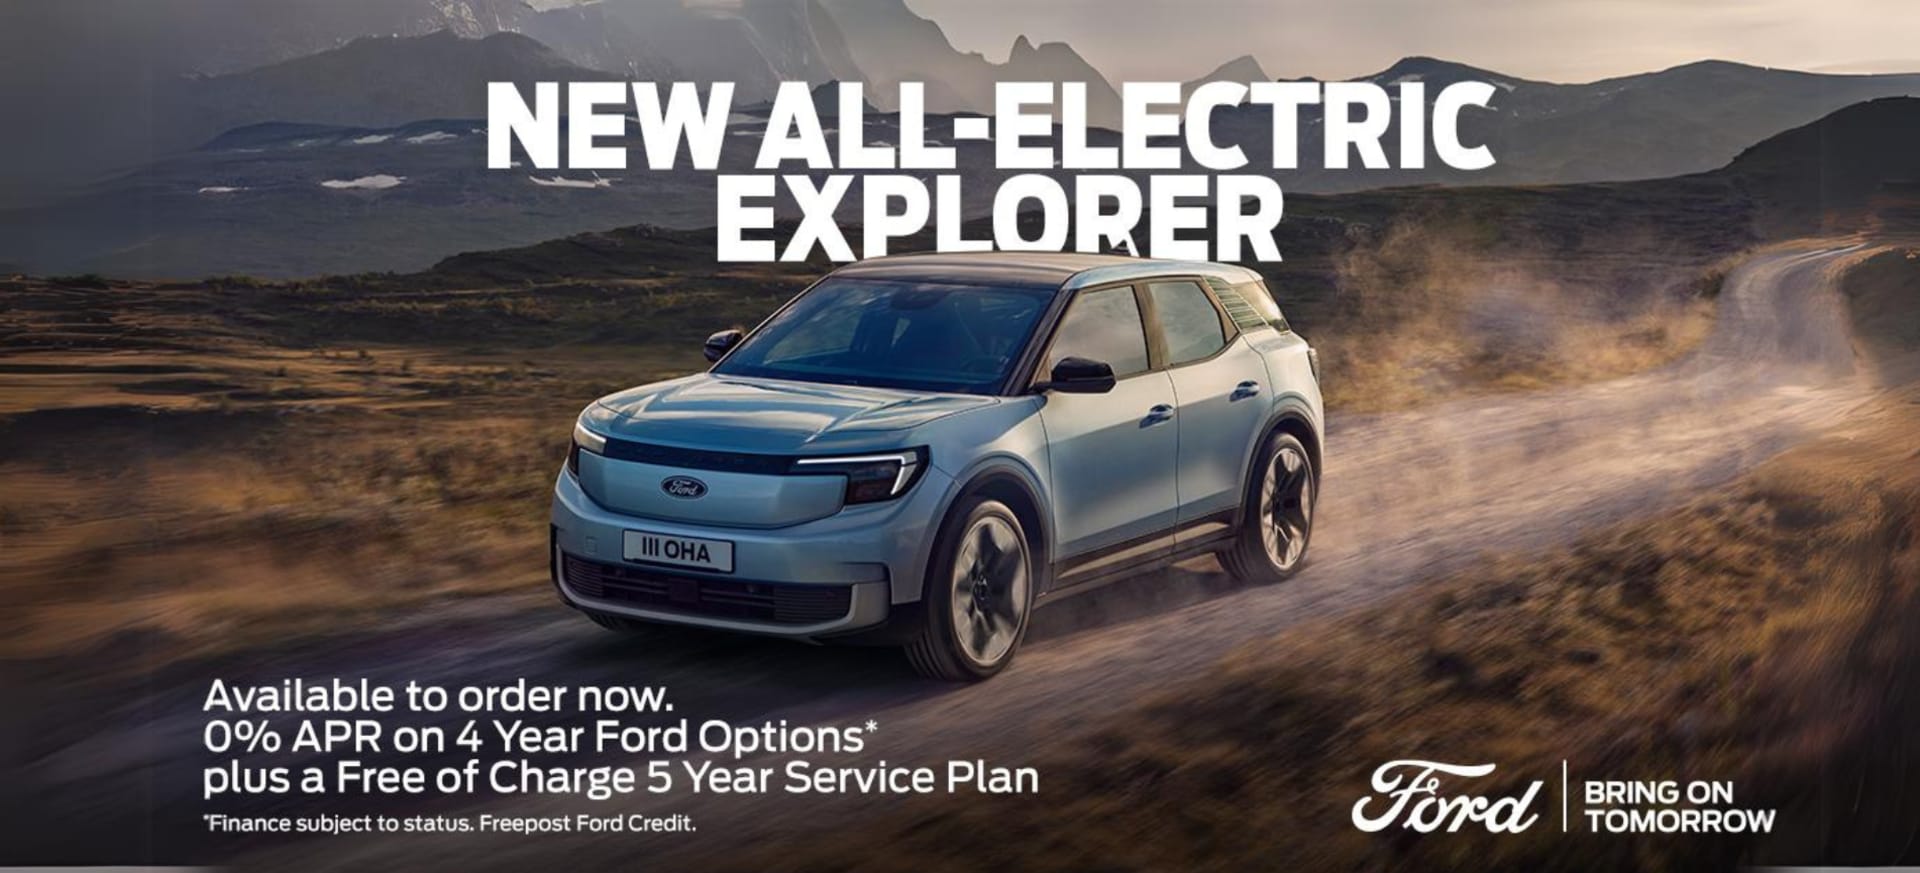 All-New Electric Ford Explorer